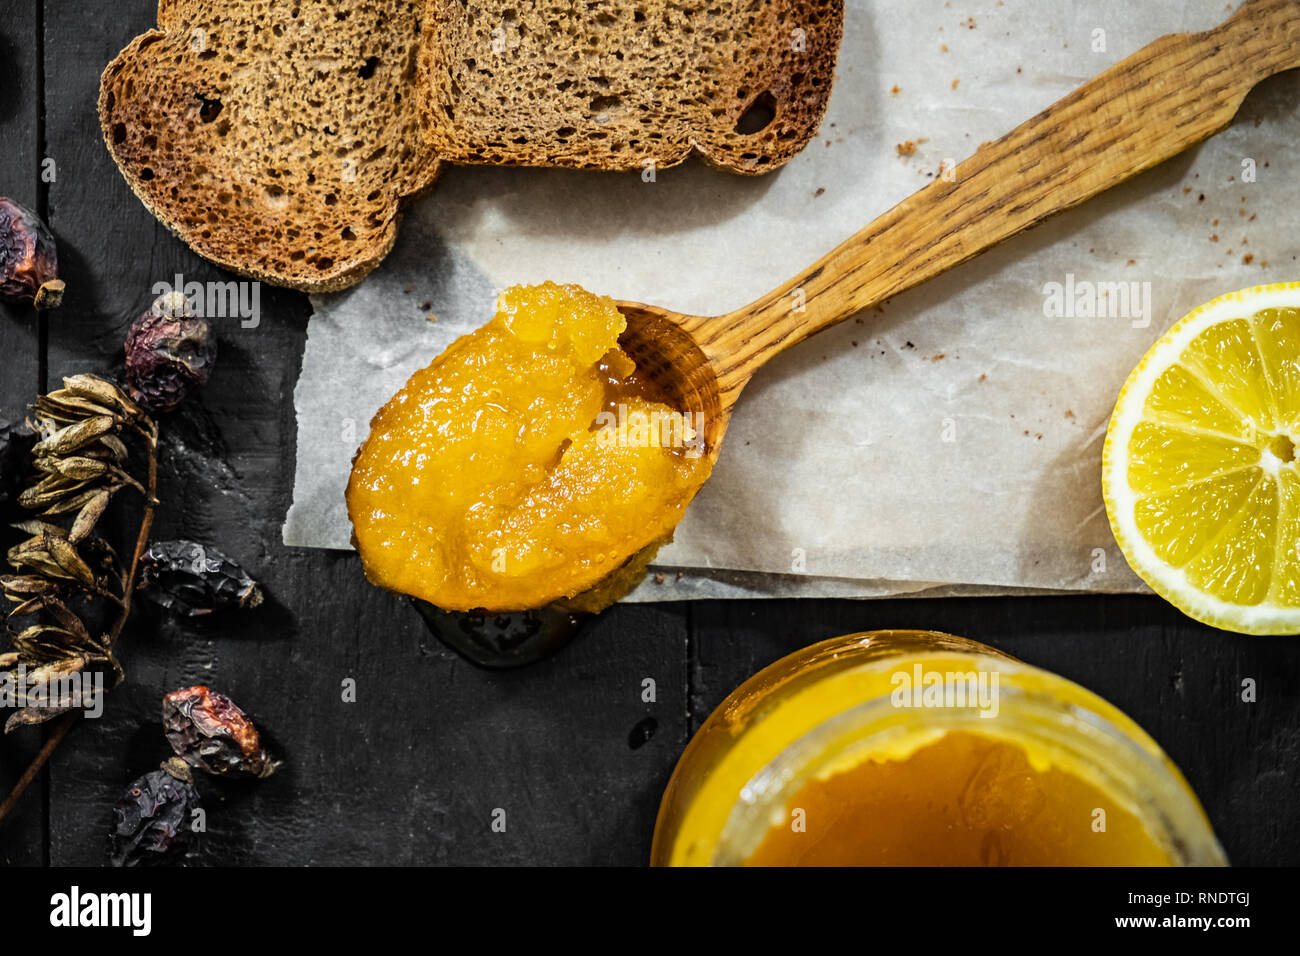 Spoonful of honey on dark rustic background, top view. Flat lay of crystallized home-made honey, low-key shot Stock Photo